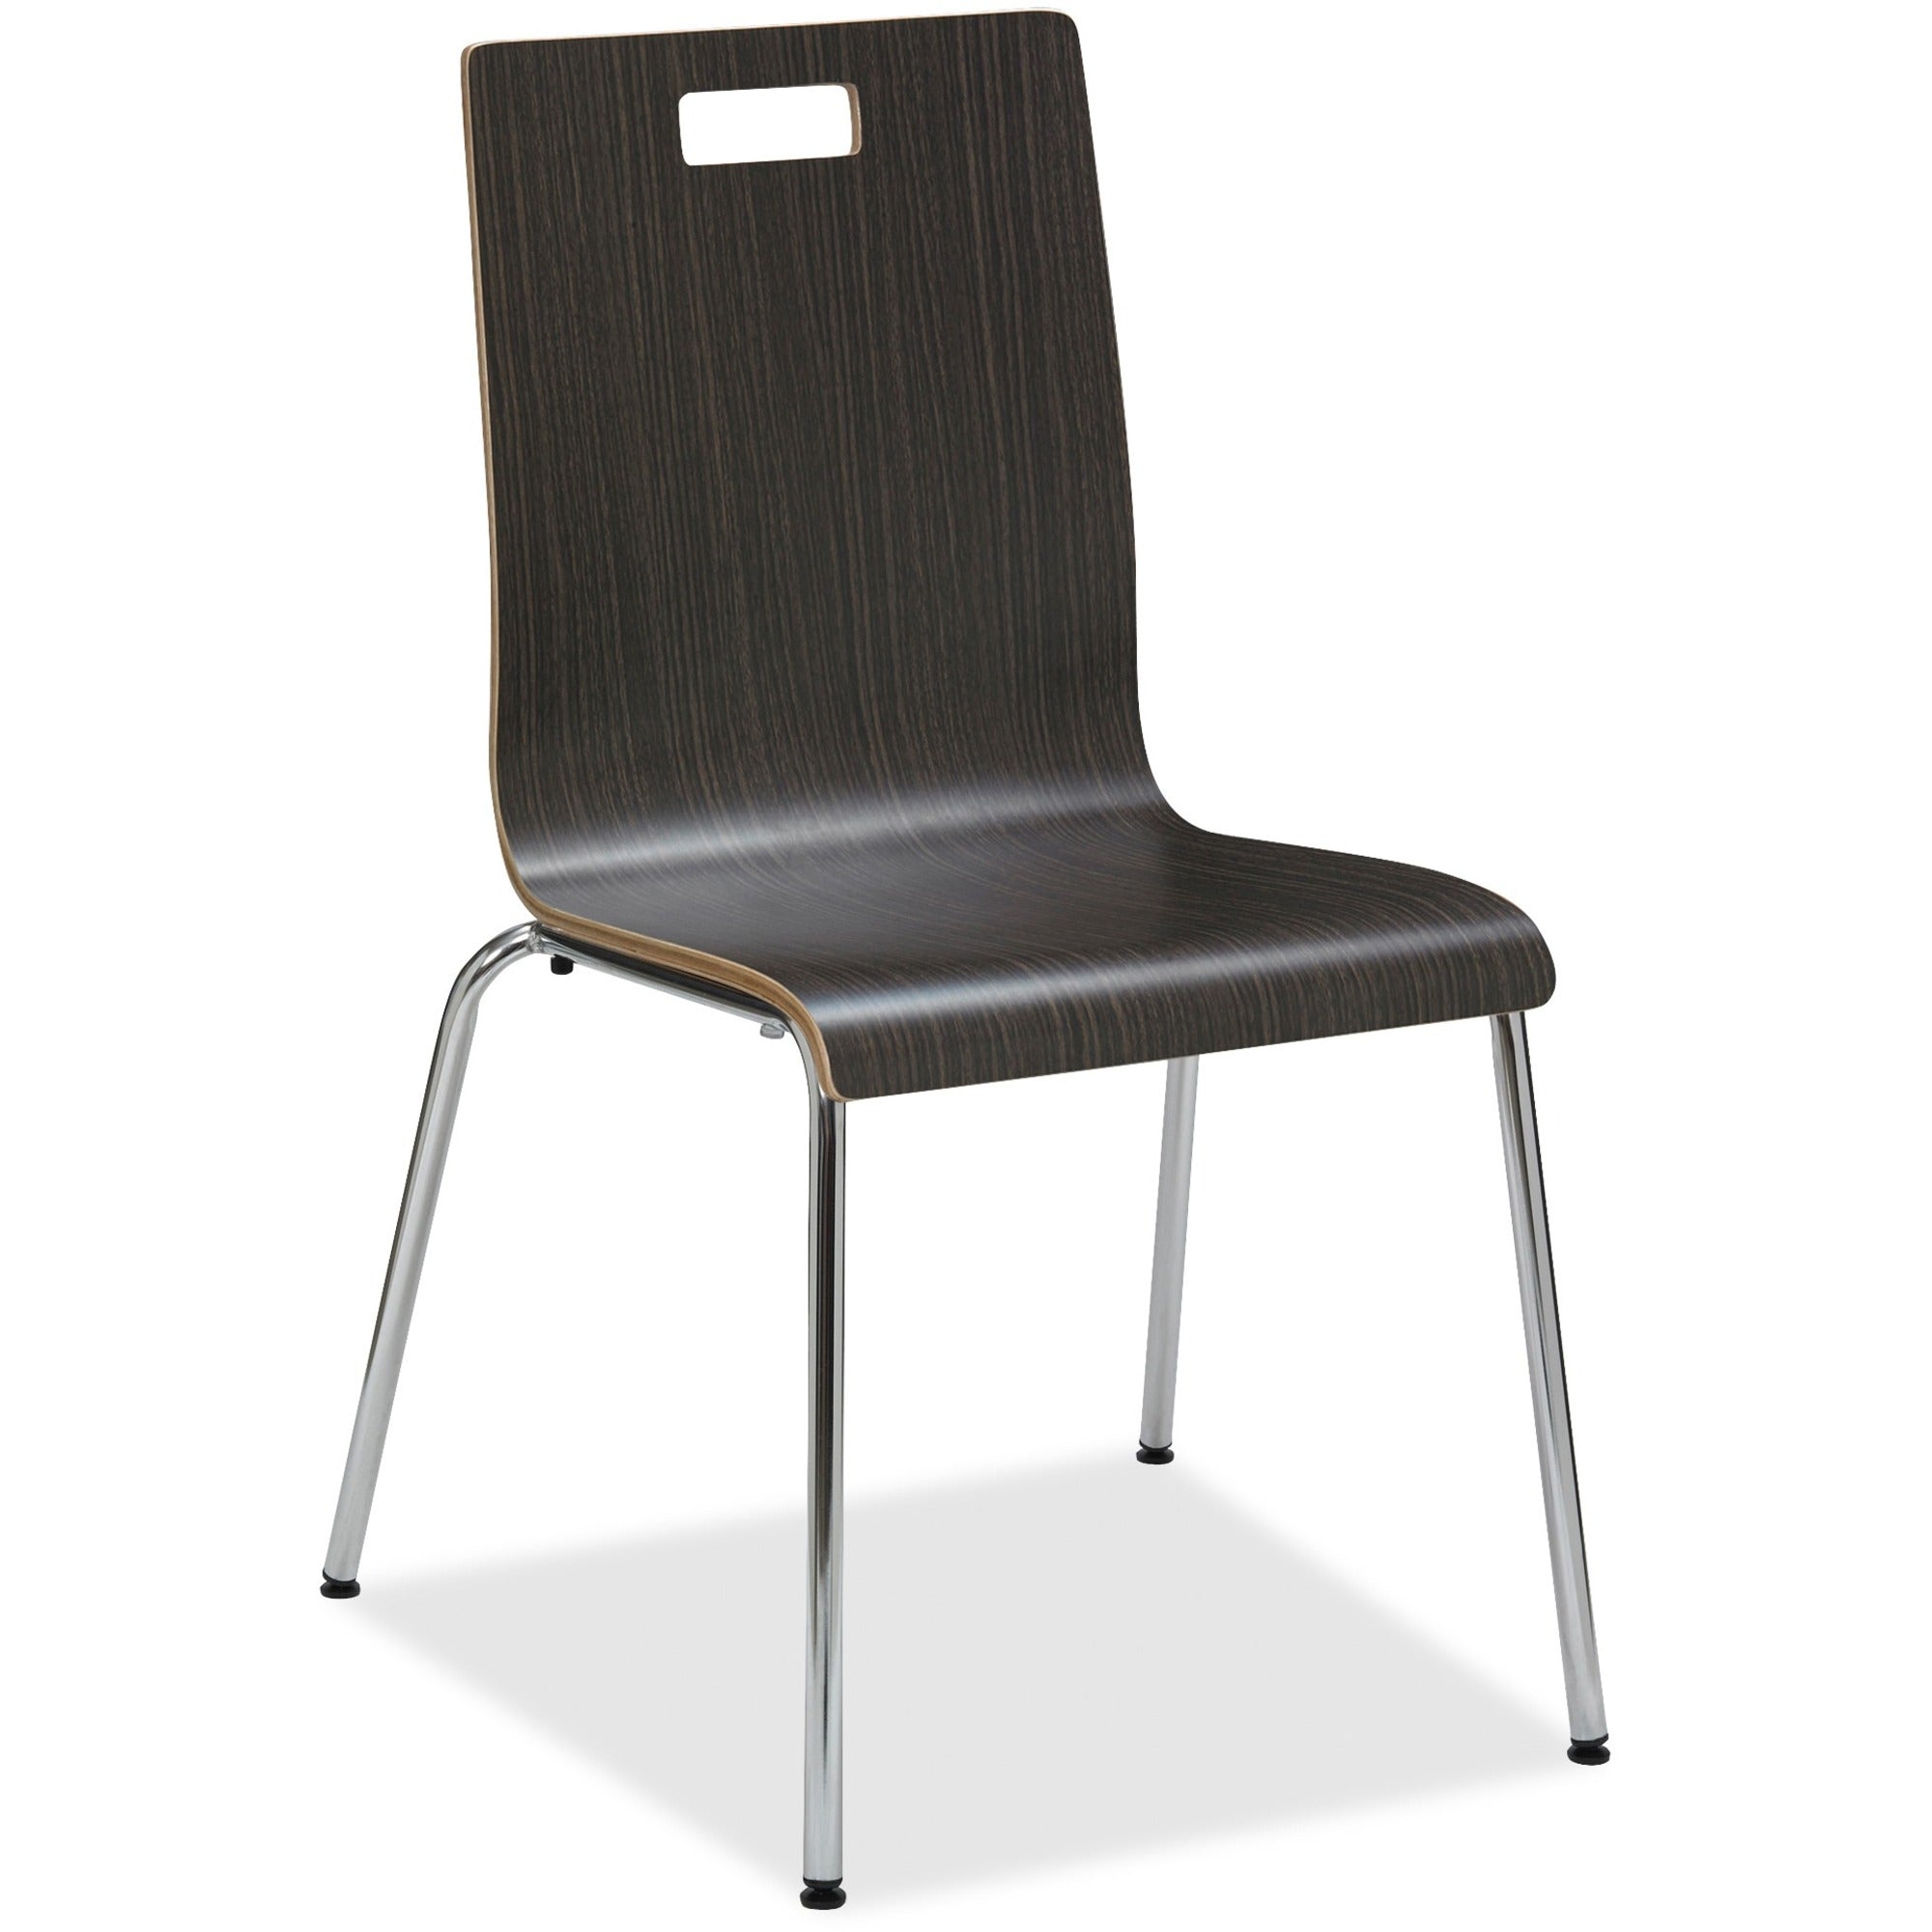 lorell-bentwood-cafe-chairs-steel-frame-espresso-plywood-bentwood-2-carton_llr99863 - 1